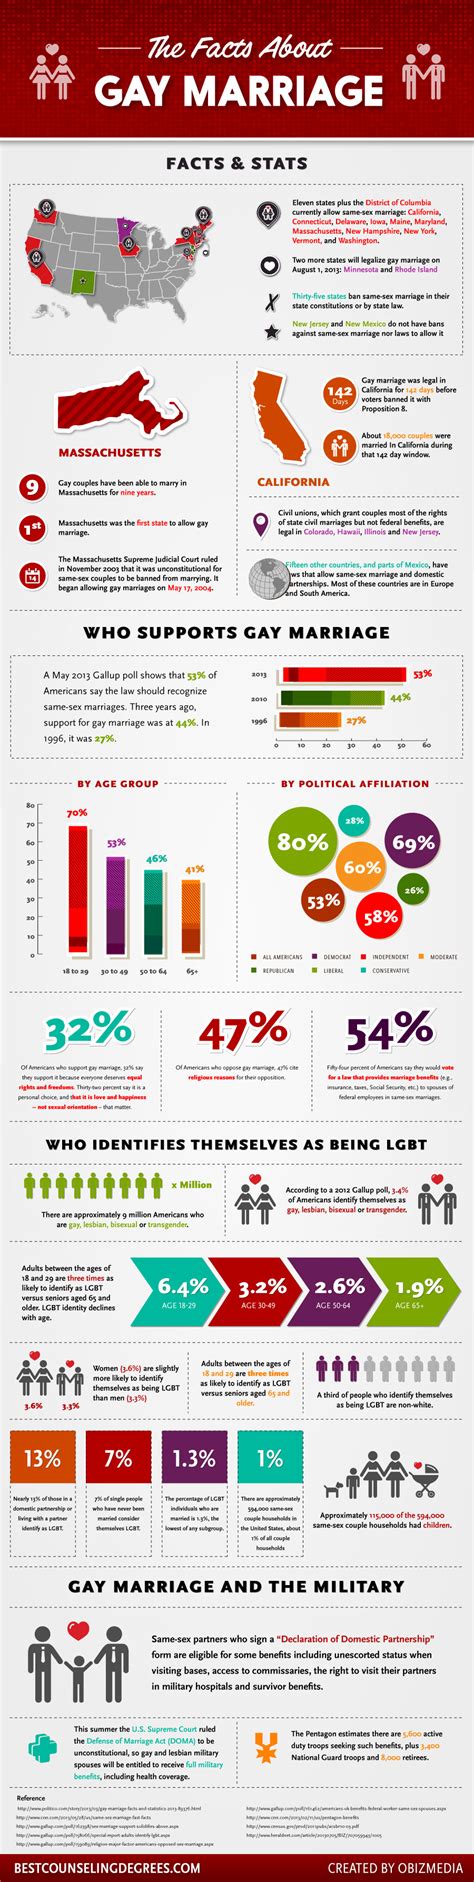 gay marriage facts and stats infographic psychology marriage equality lesbian gay